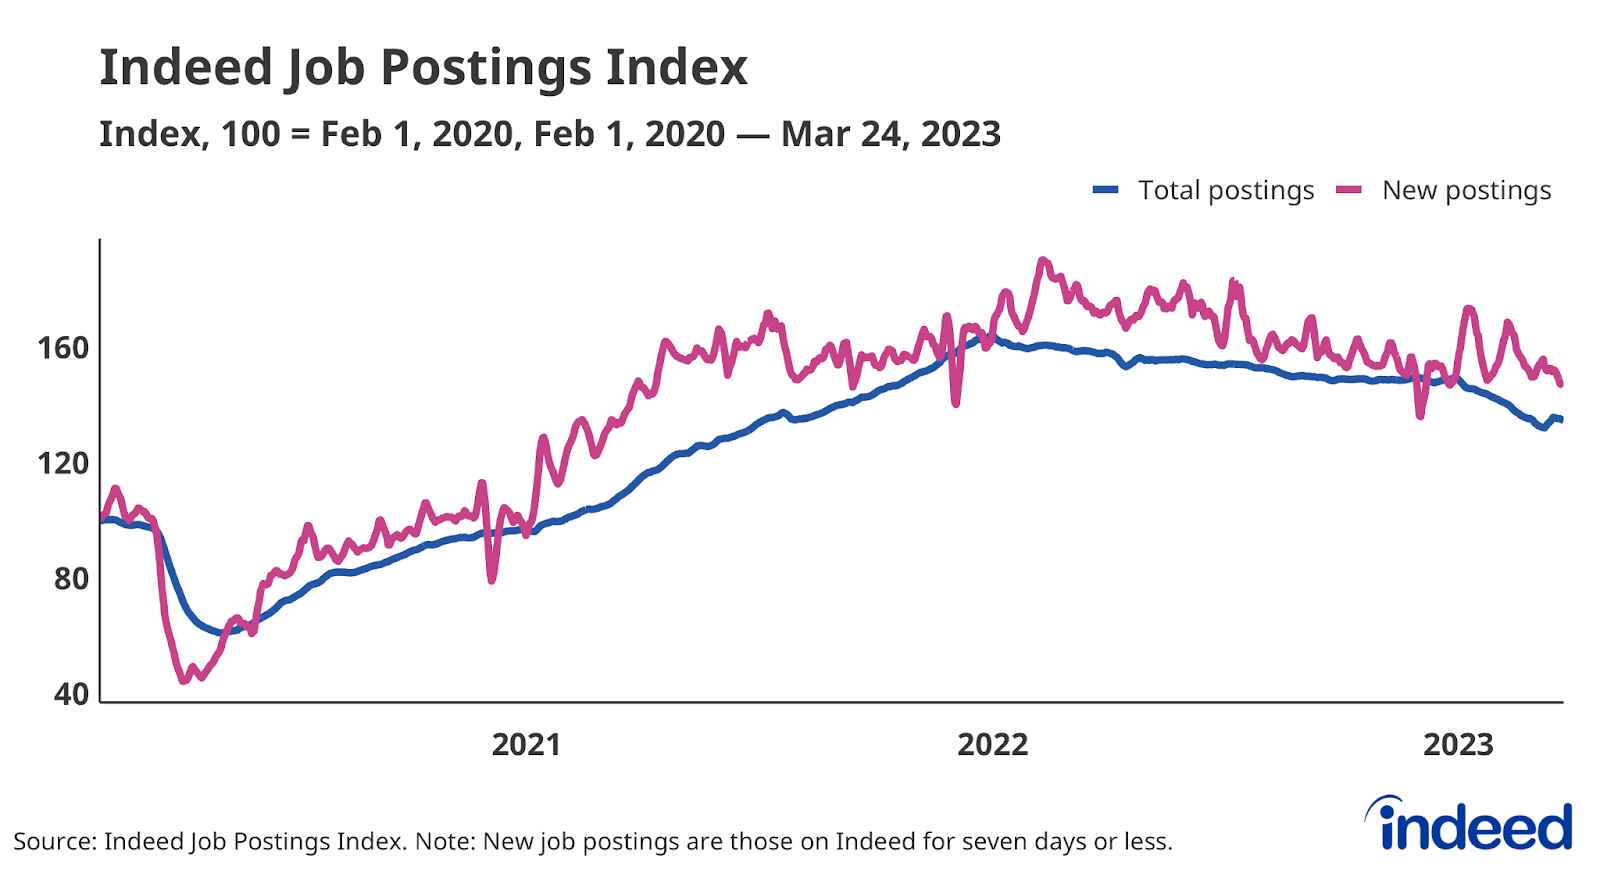 Line graph titled “Indeed Job Postings Index” with a vertical axis spanning from 40 to 160. 